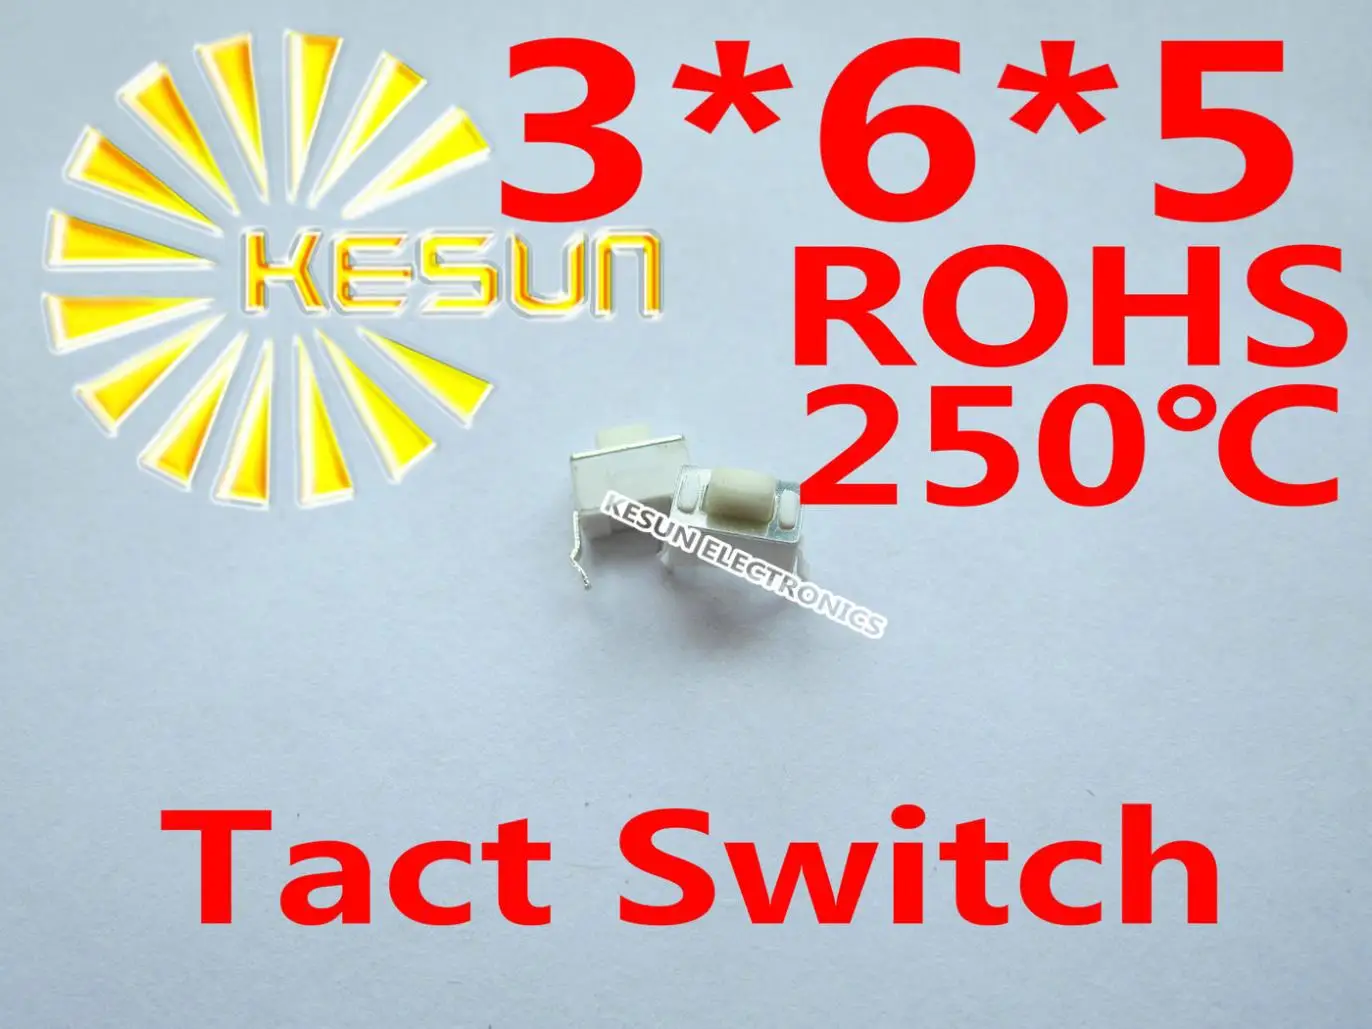 

FREE SHIPPING 1000PCS DIP 3X6X5MM Tactile Tact Push Button Micro Switch Momentary ROHS